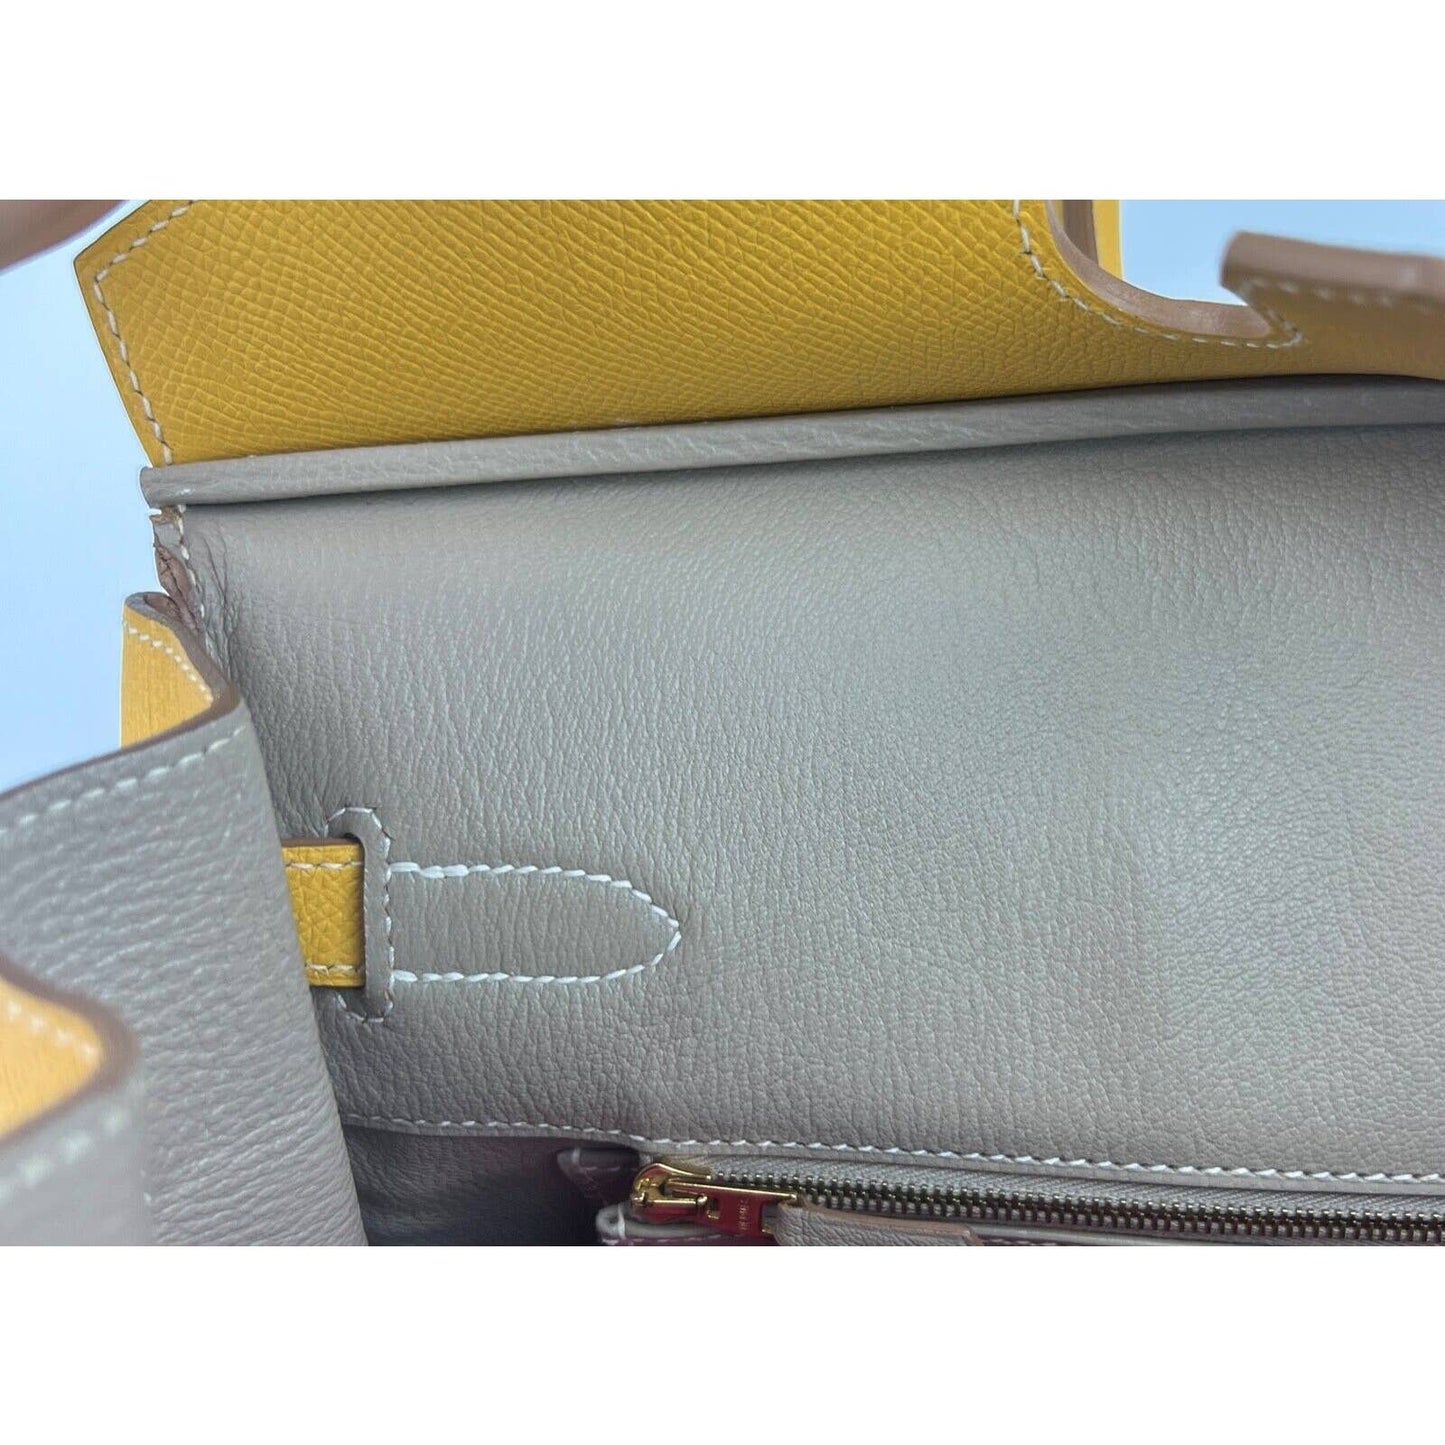 Hermes Birkin 35 Candy Yellow Gris Gary Epsom Leather Gold Hardware